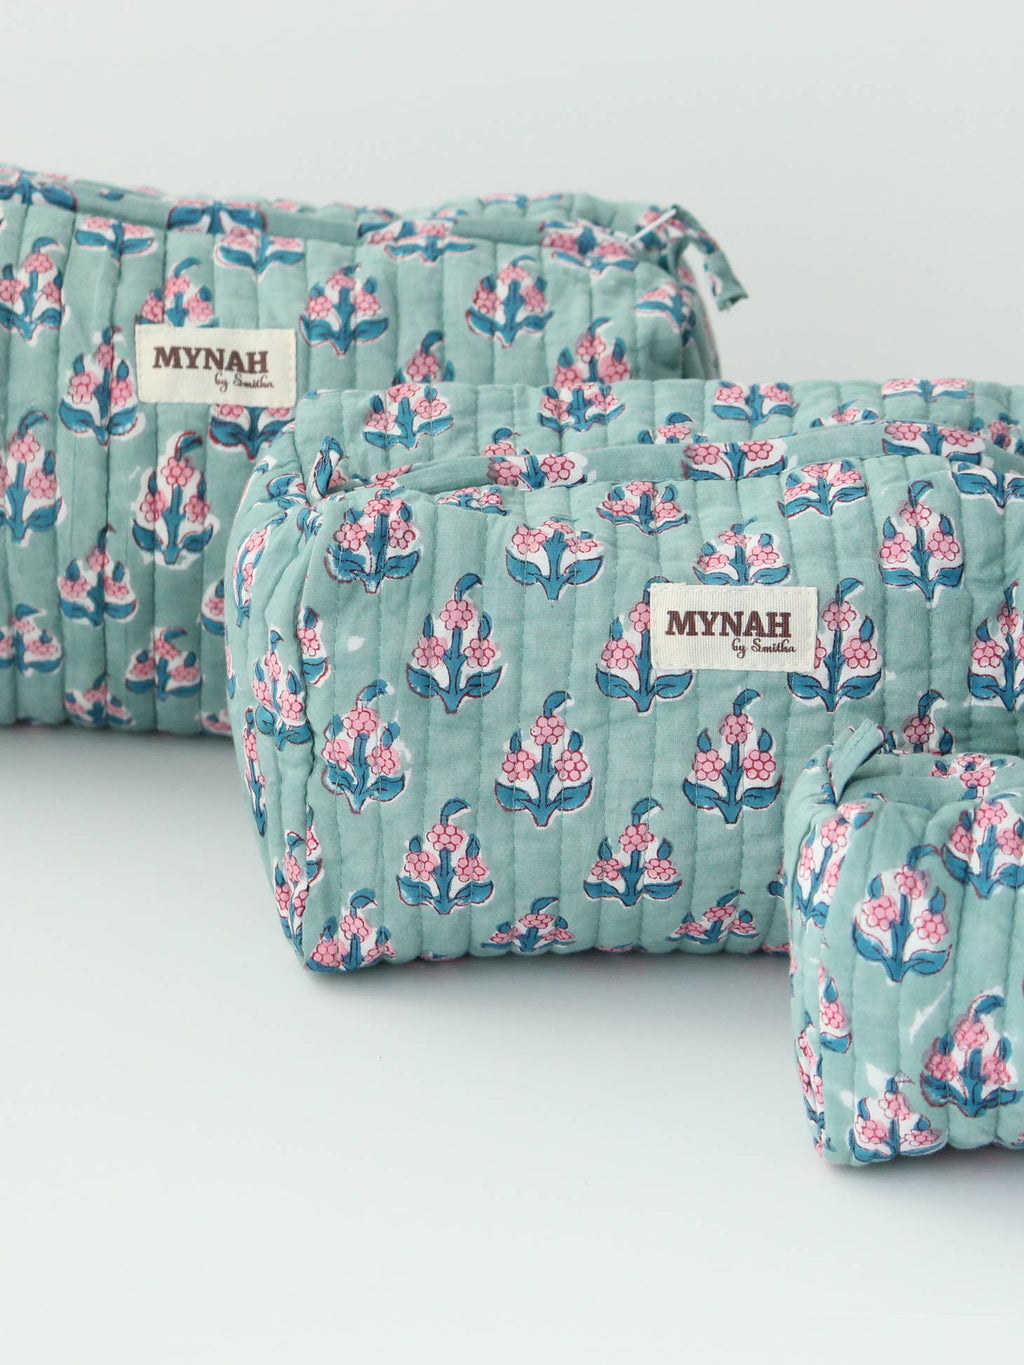 MYNAHbySmitha Quilted Travel Bag in Eucalyptus Floral -Assorted Sizes